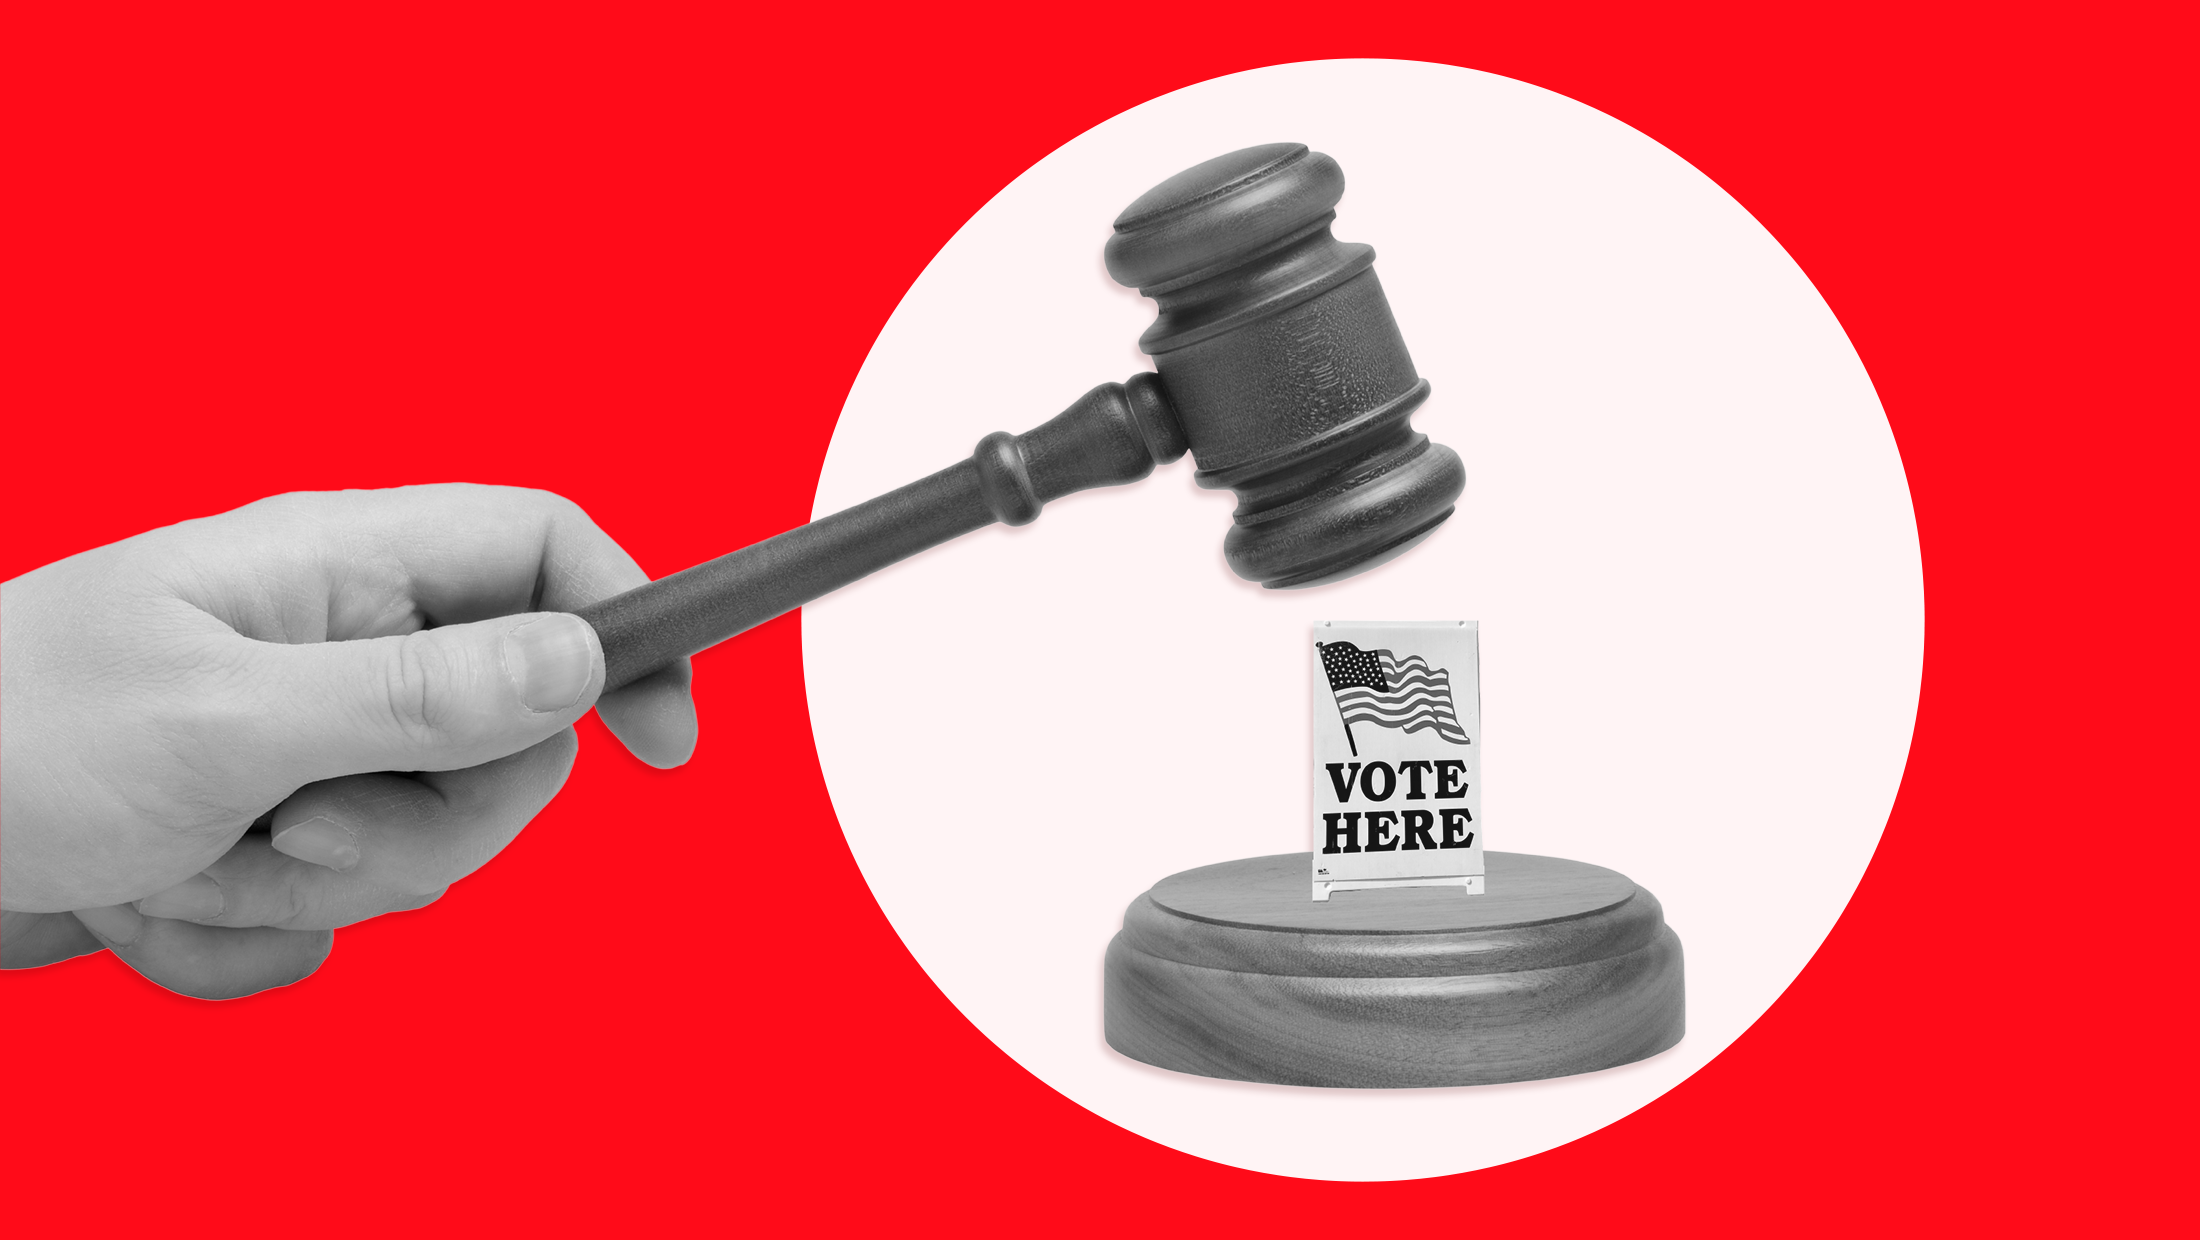 A small "Vote Here" sign sitting on a wooden gavel block with a large looming hand holding a gavel over it, ready to strike